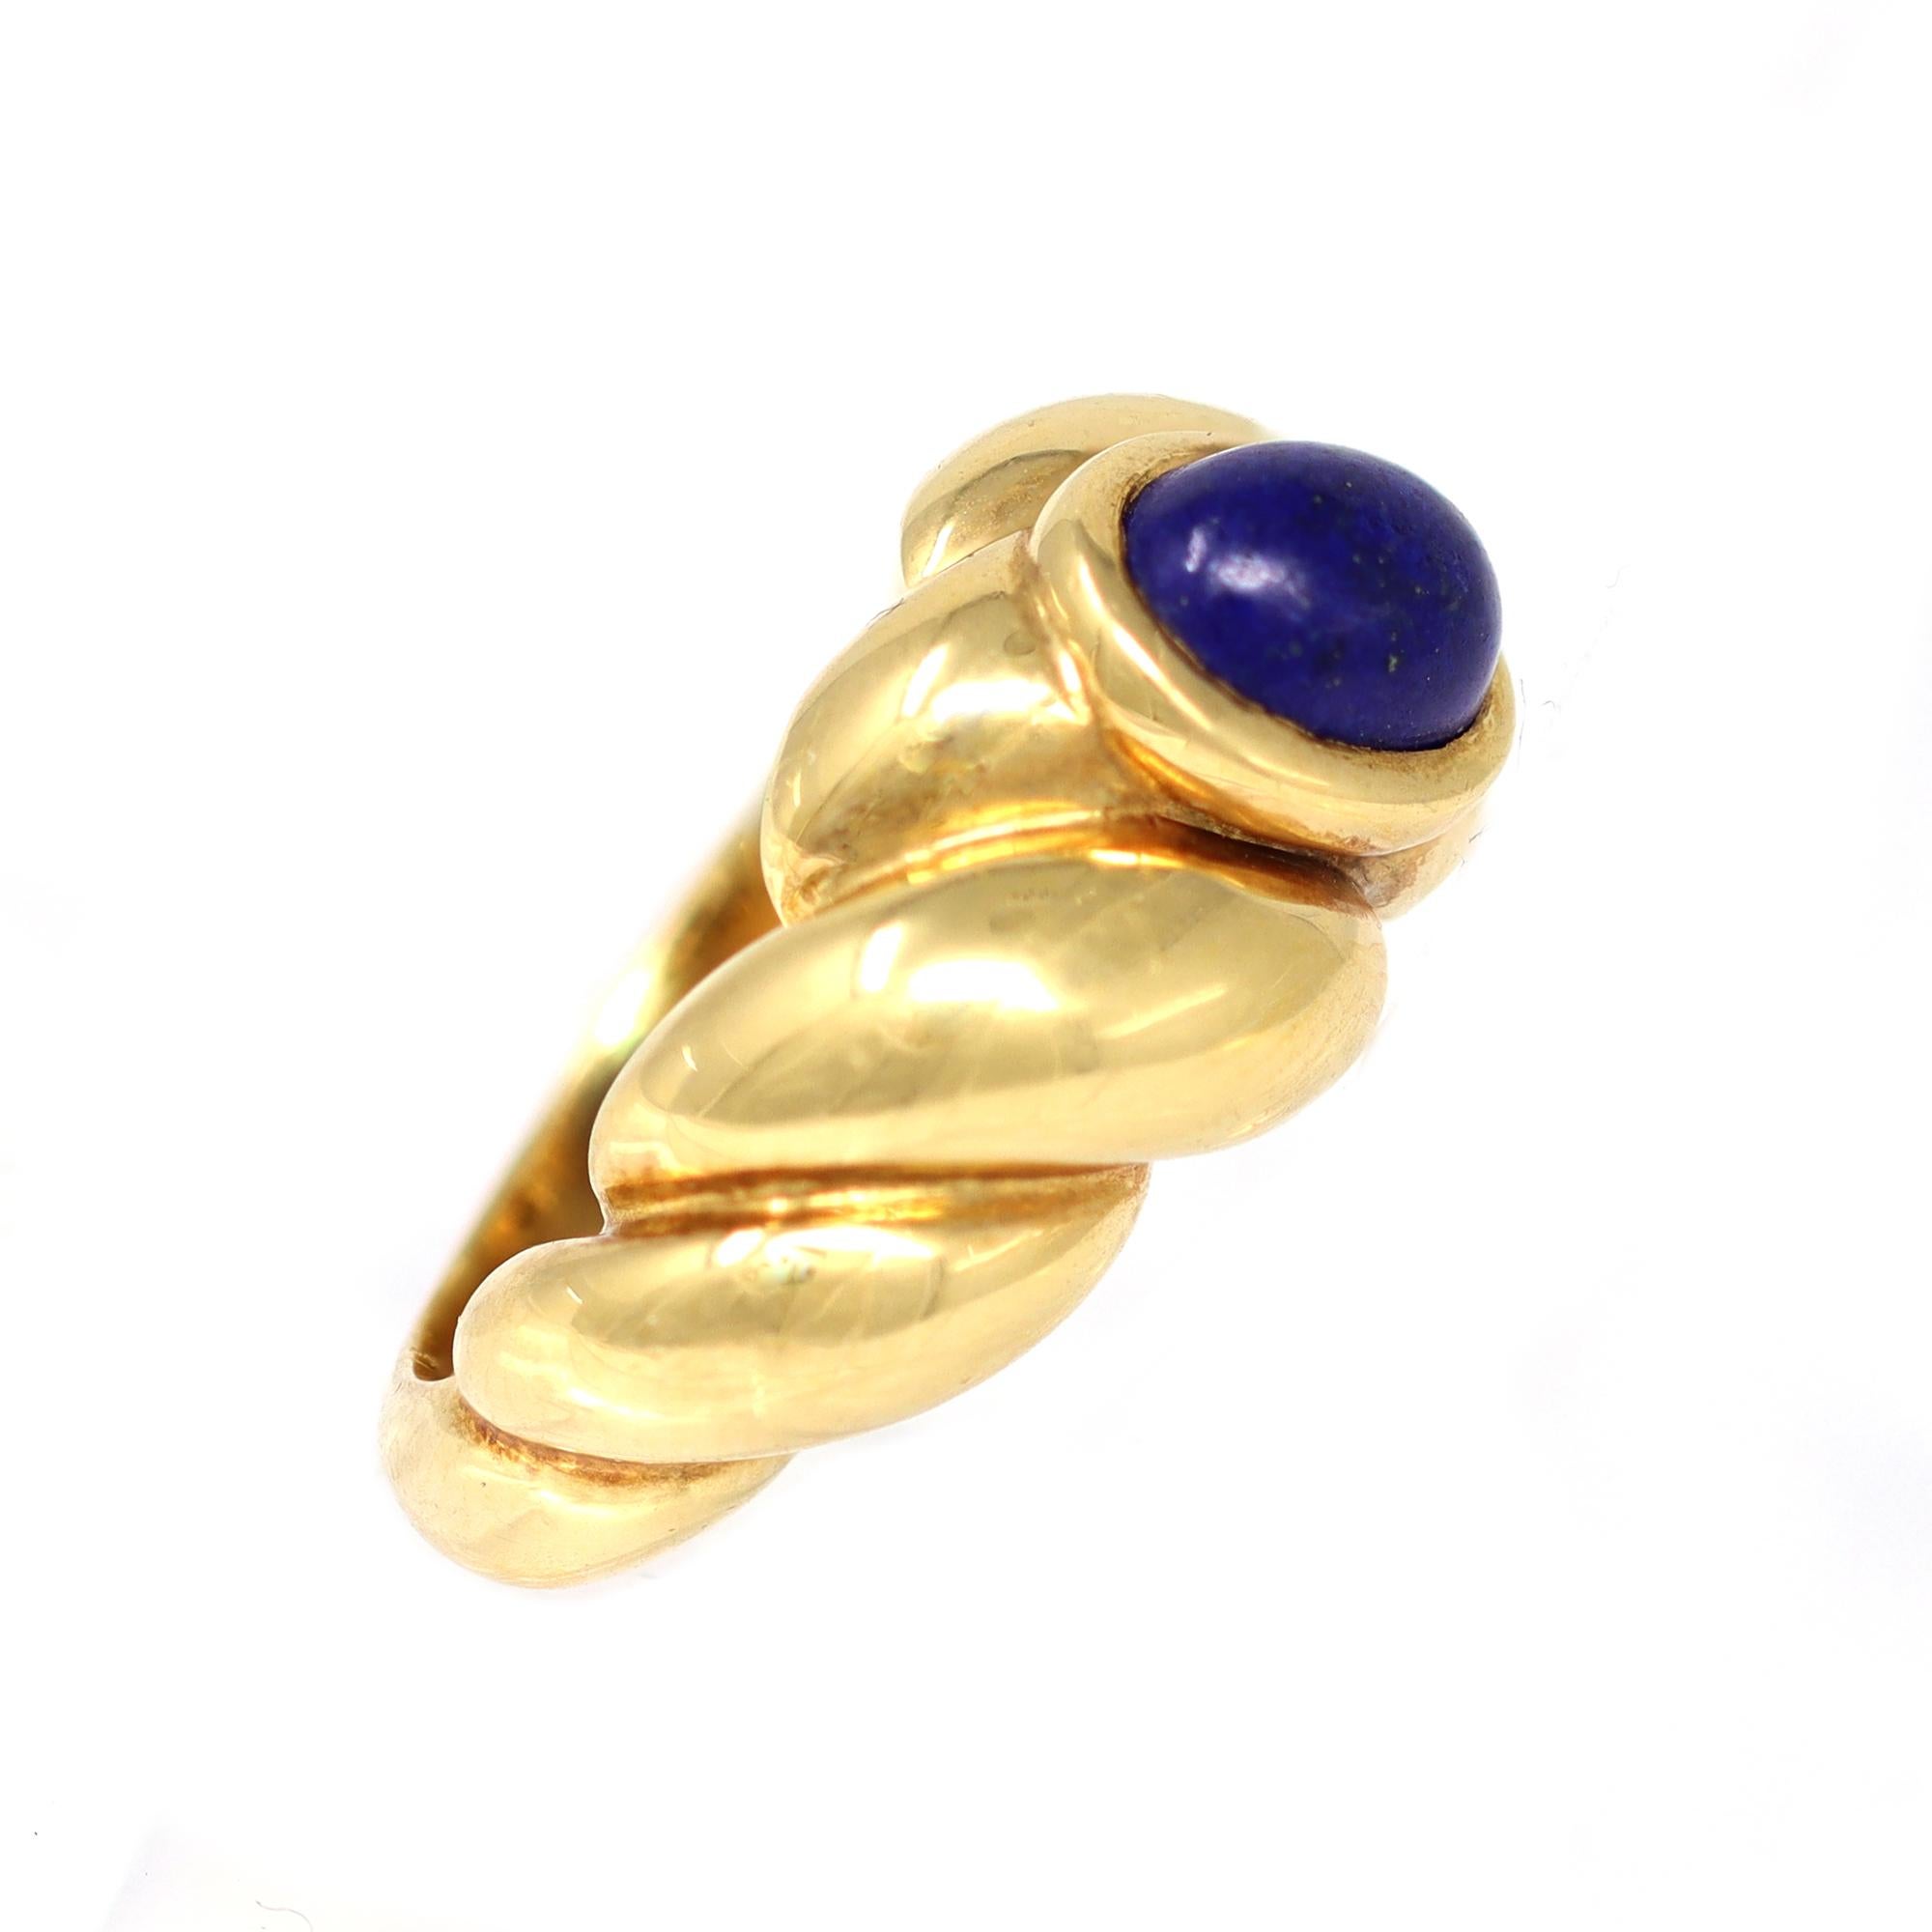 Van Cleef & Arpels Lapis Lazuli Cabochon Ring Set in 18k Yellow Gold In Excellent Condition For Sale In Miami, FL